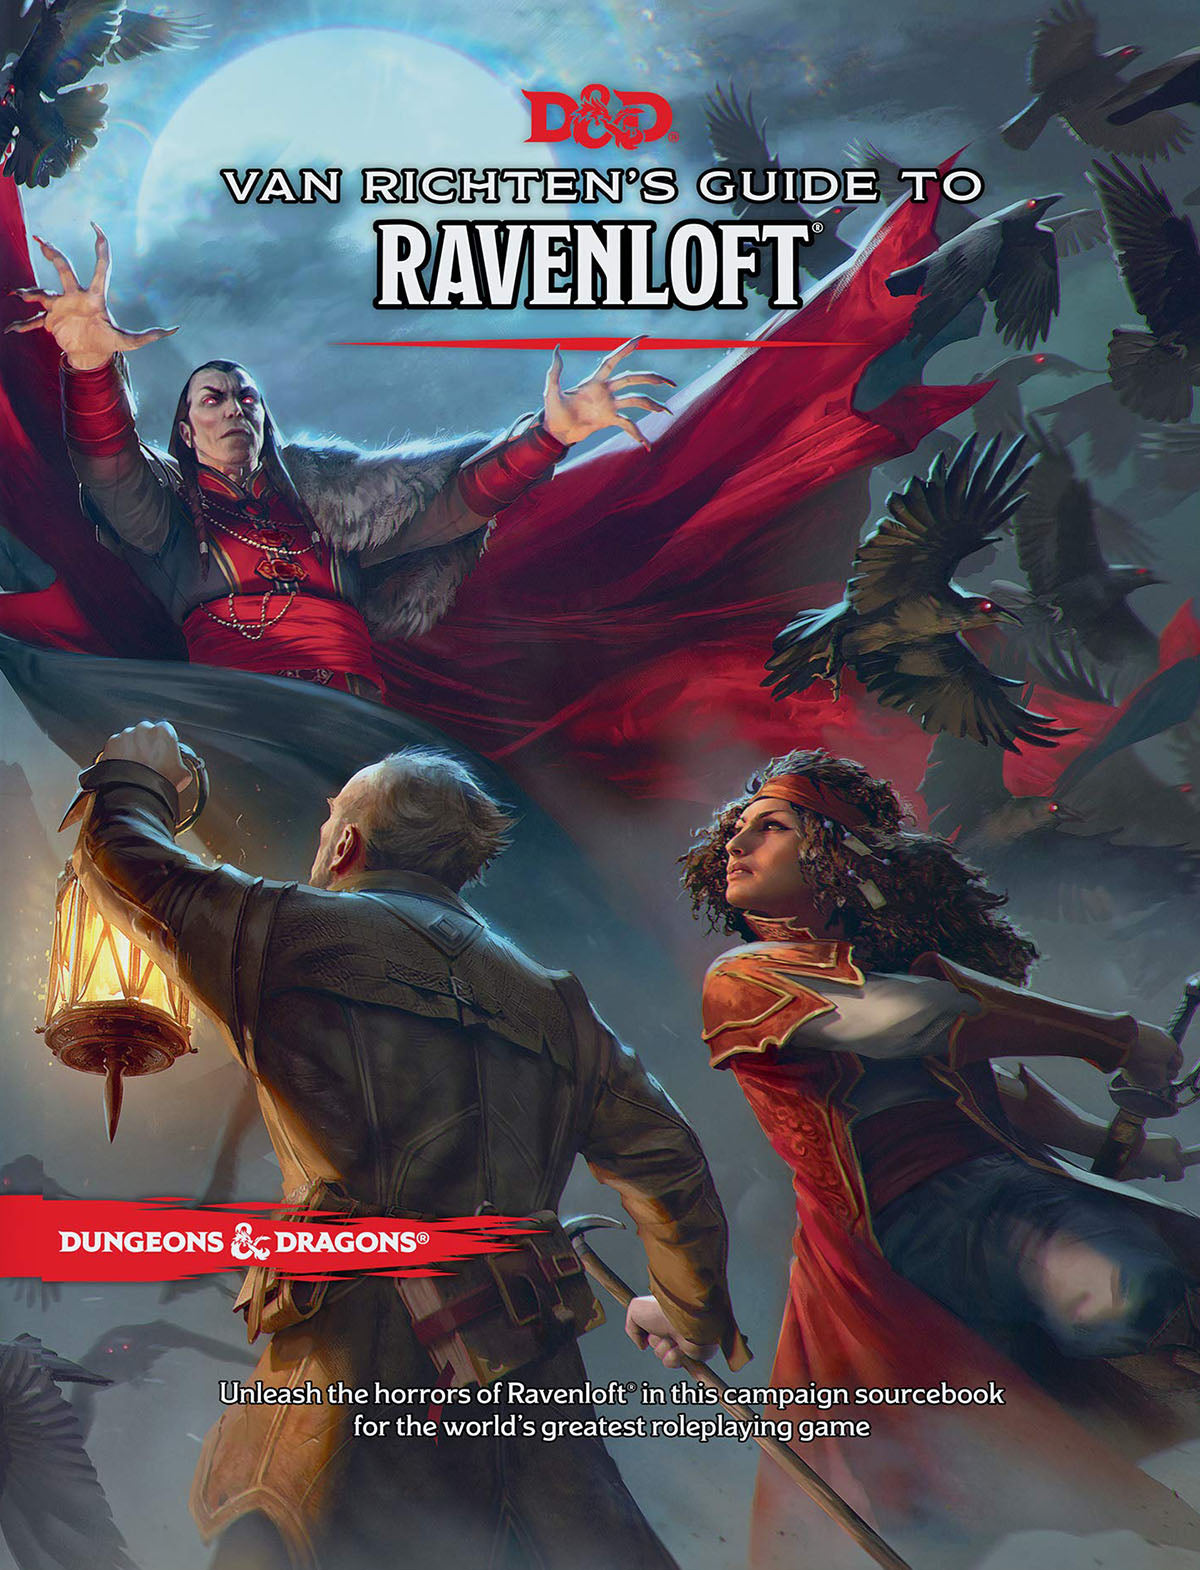 Van Richten's Guide to Ravenloft contains everything you need to craft a horror-themed campaign for Dungeons & Dragons.